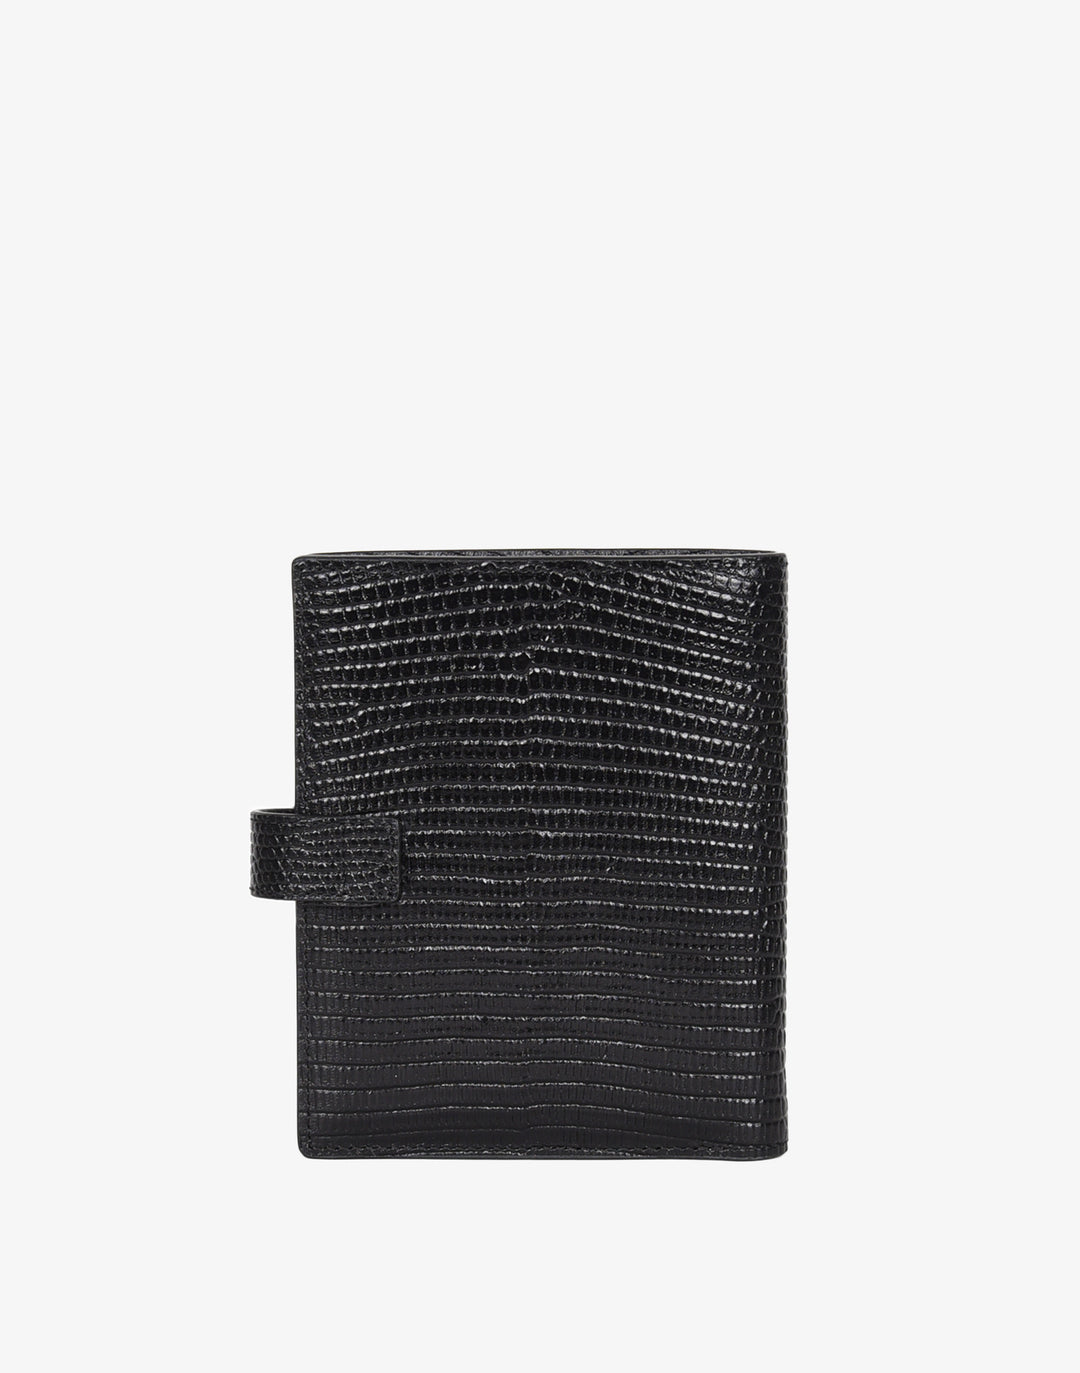 hyer goods recycled leather travel passport wallet with zipper pocket embossed black lizard#color_black-lizard